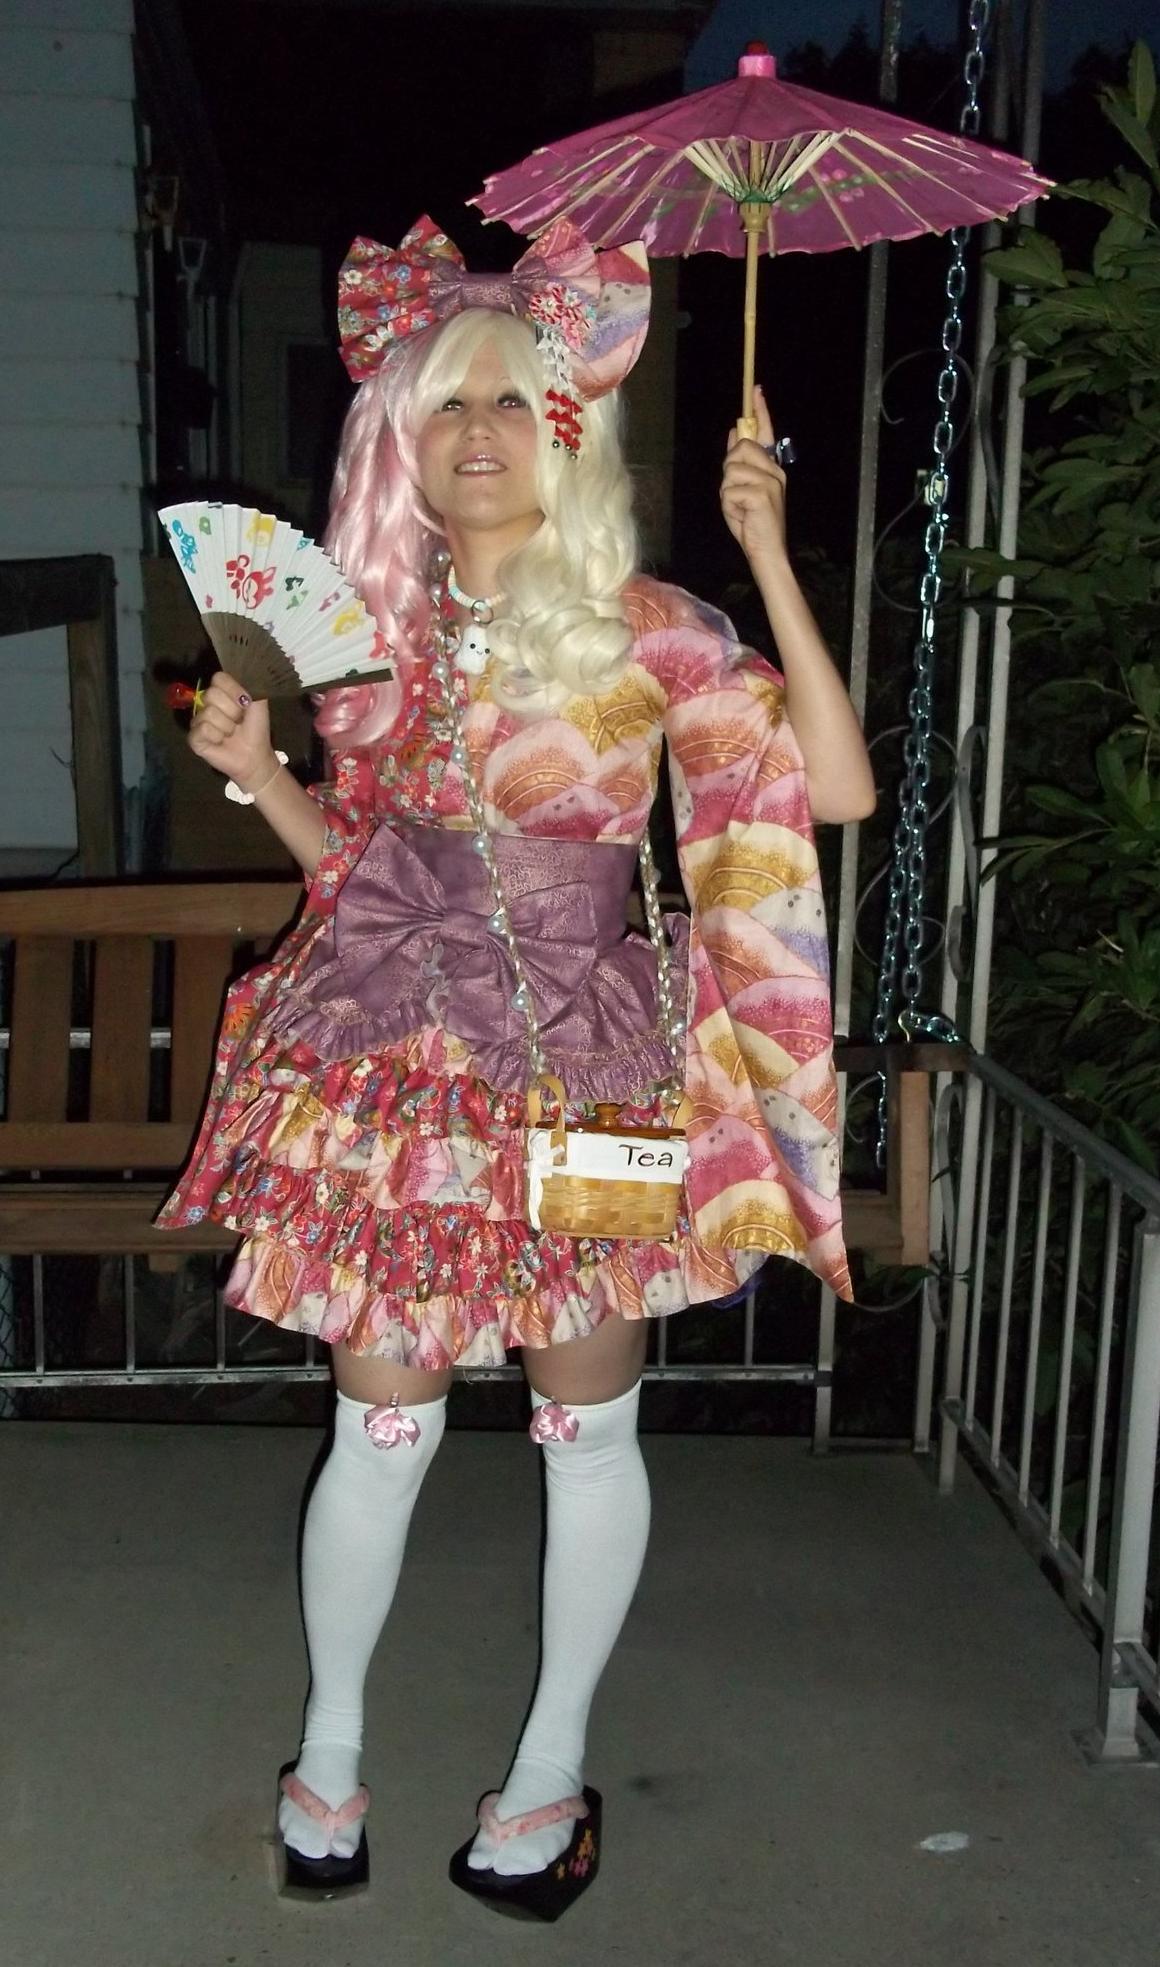 Blonde Lolita wearing White Opaque Stockings and Colored Dress